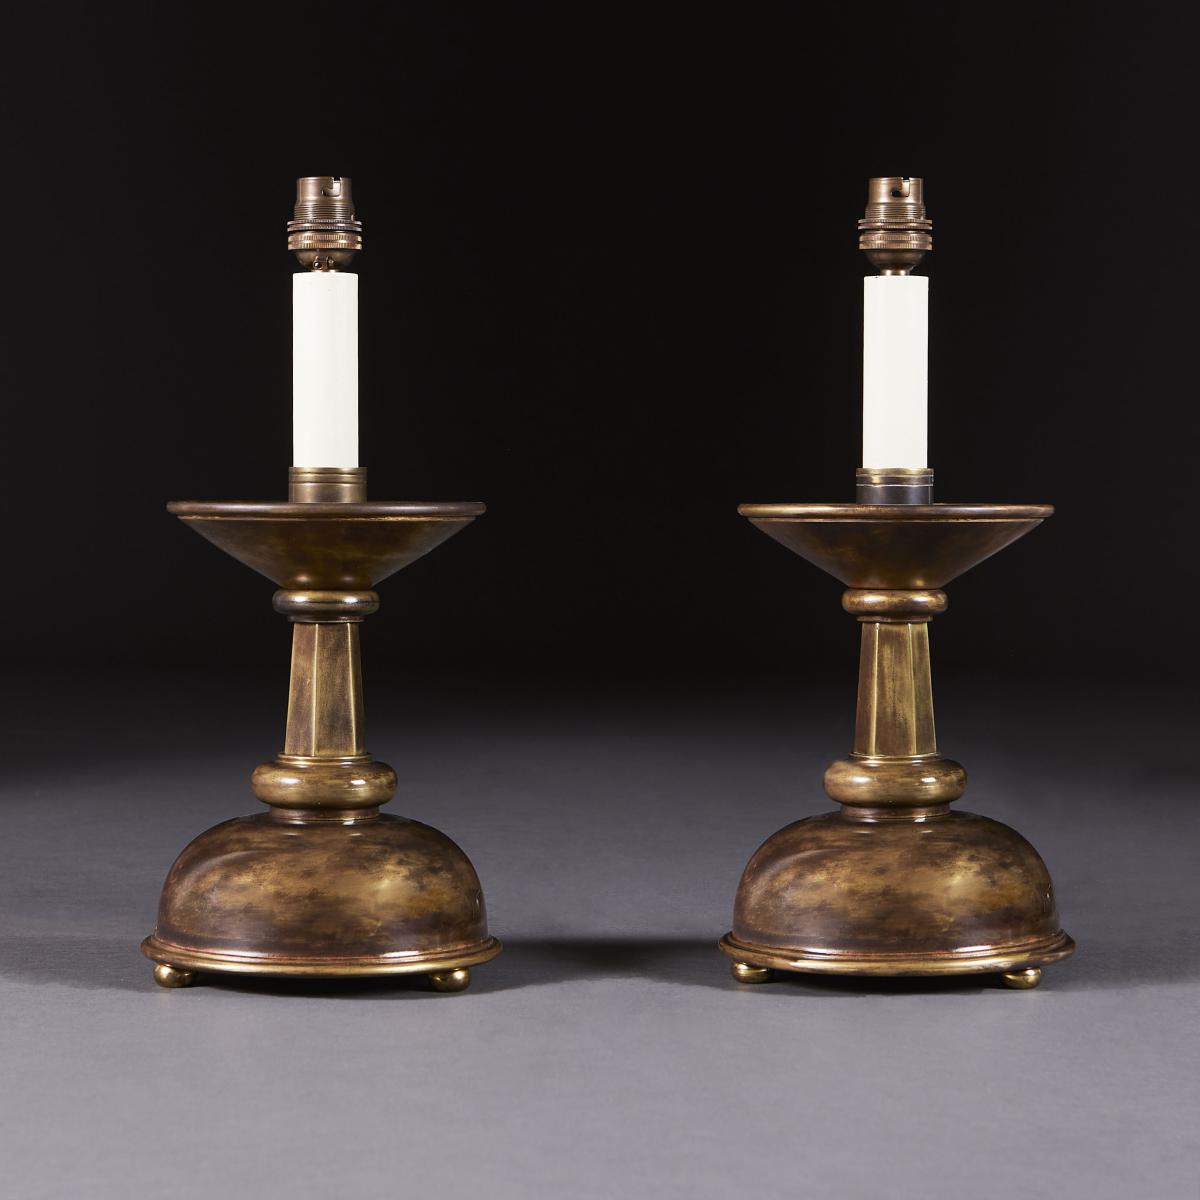 A Pair of Arts and Crafts Brass Lamps